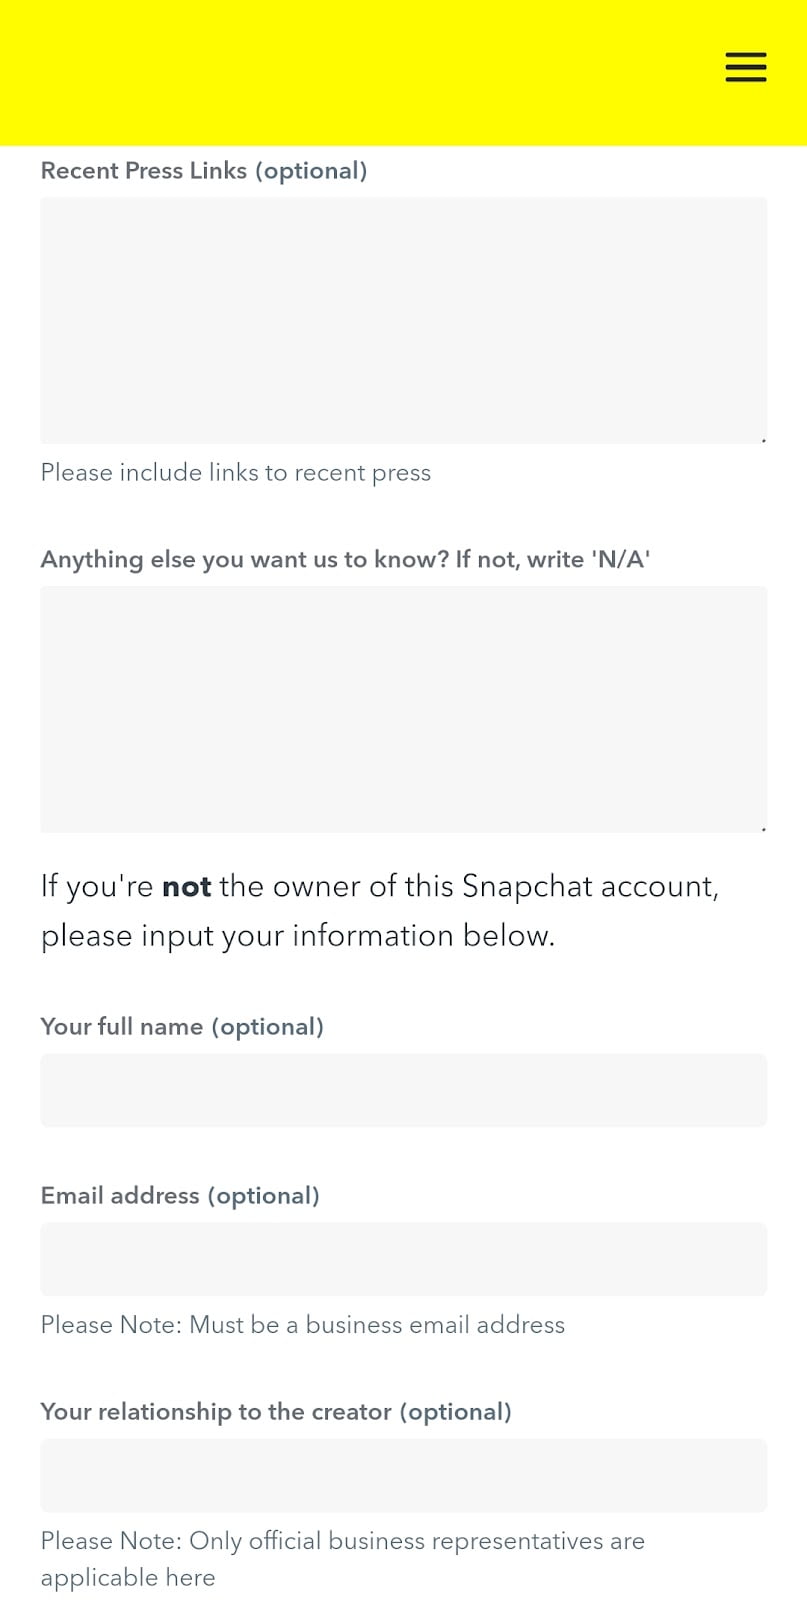 How To Get Verified on Snapchat